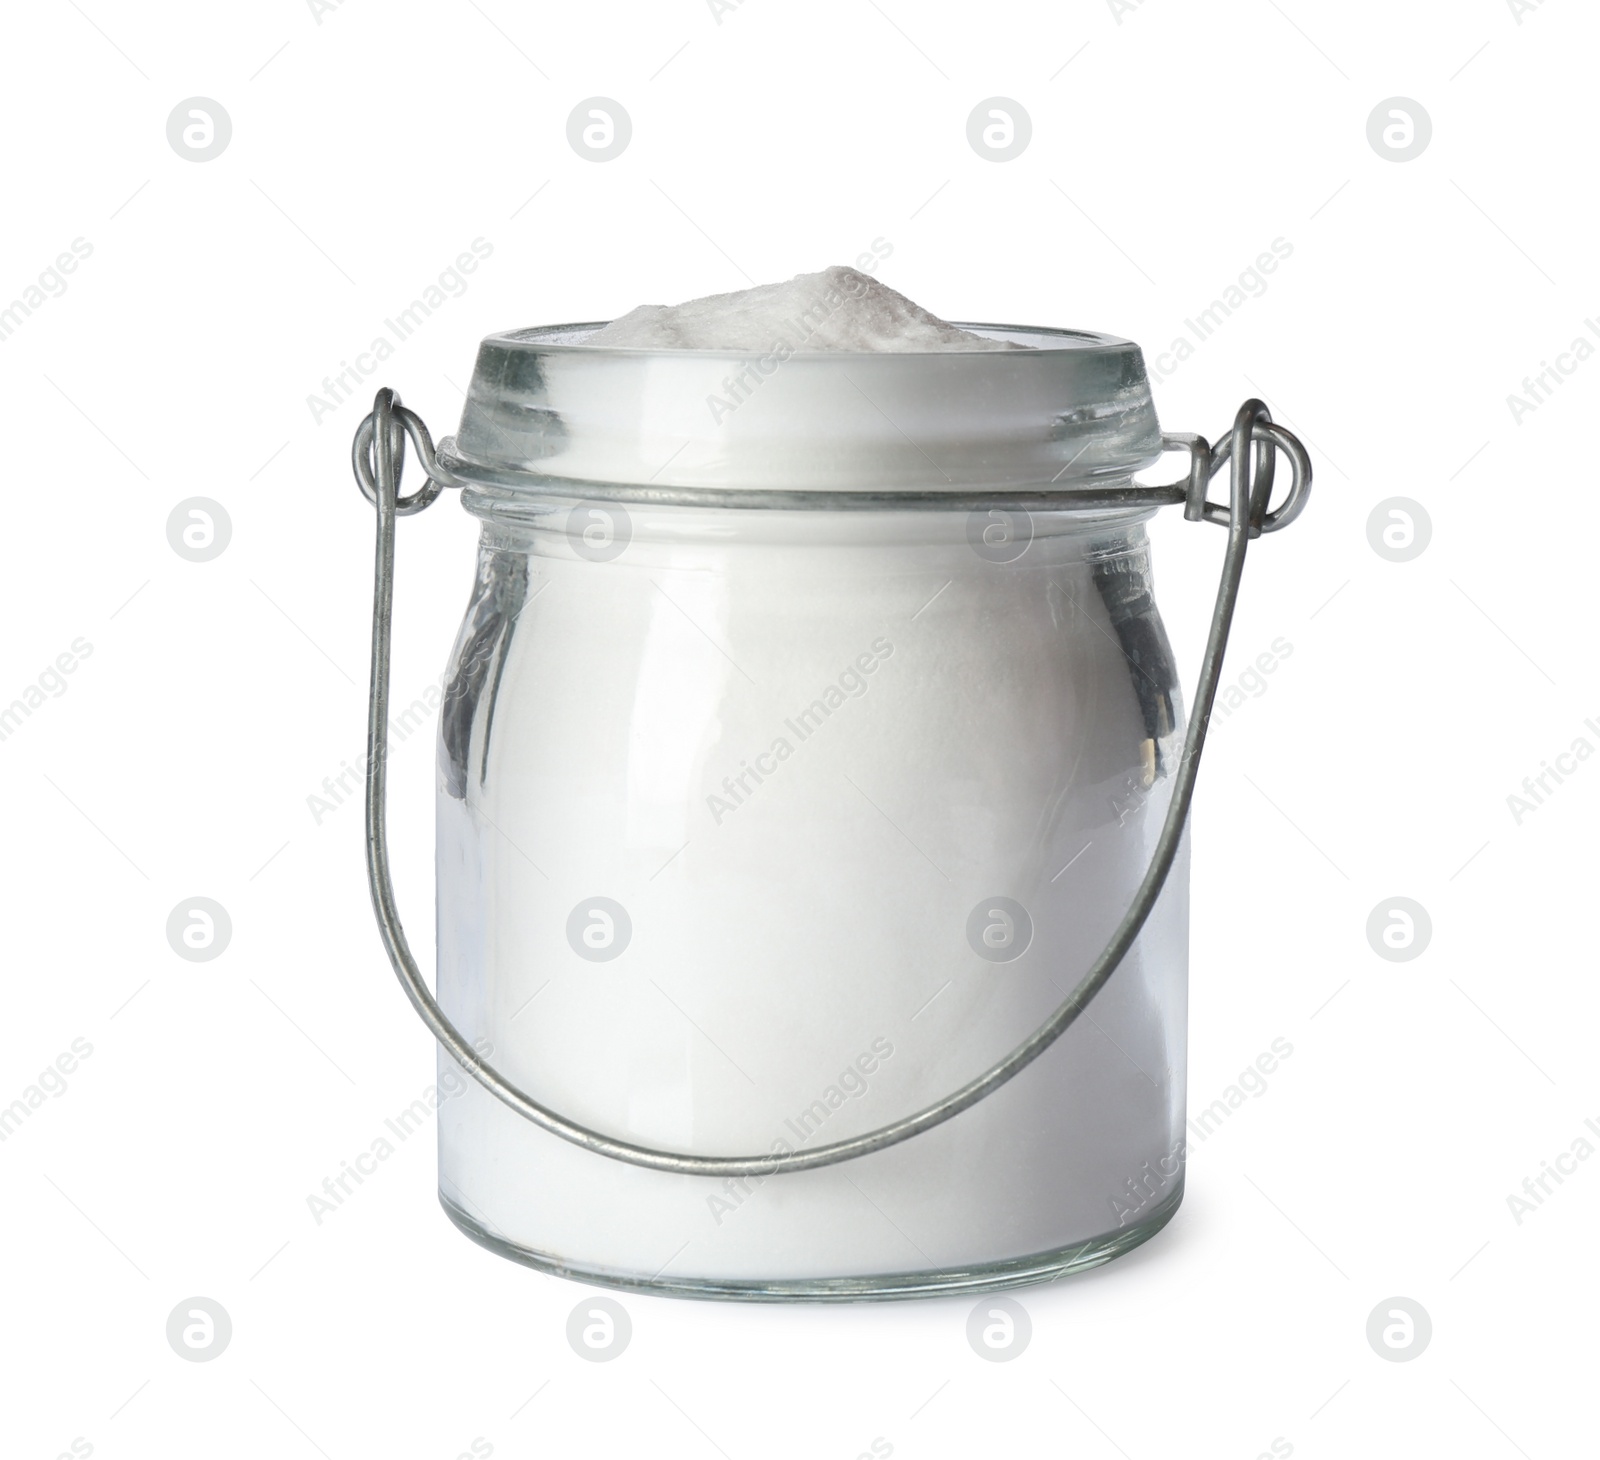 Photo of Baking soda in glass jar isolated on white